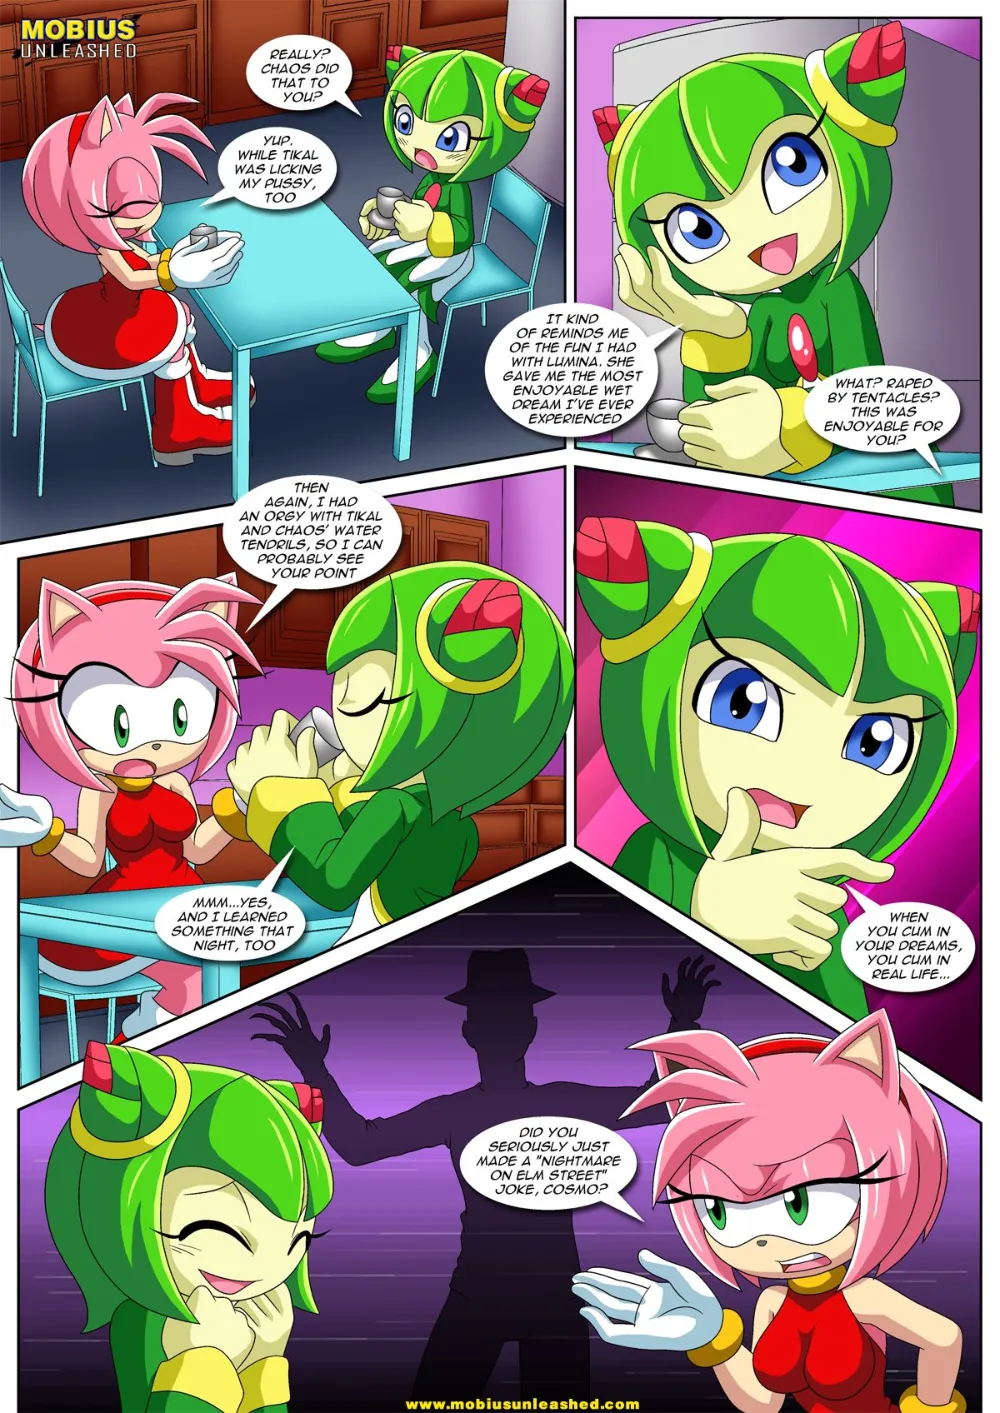 Team GF's Tentacled Tale - Page 2